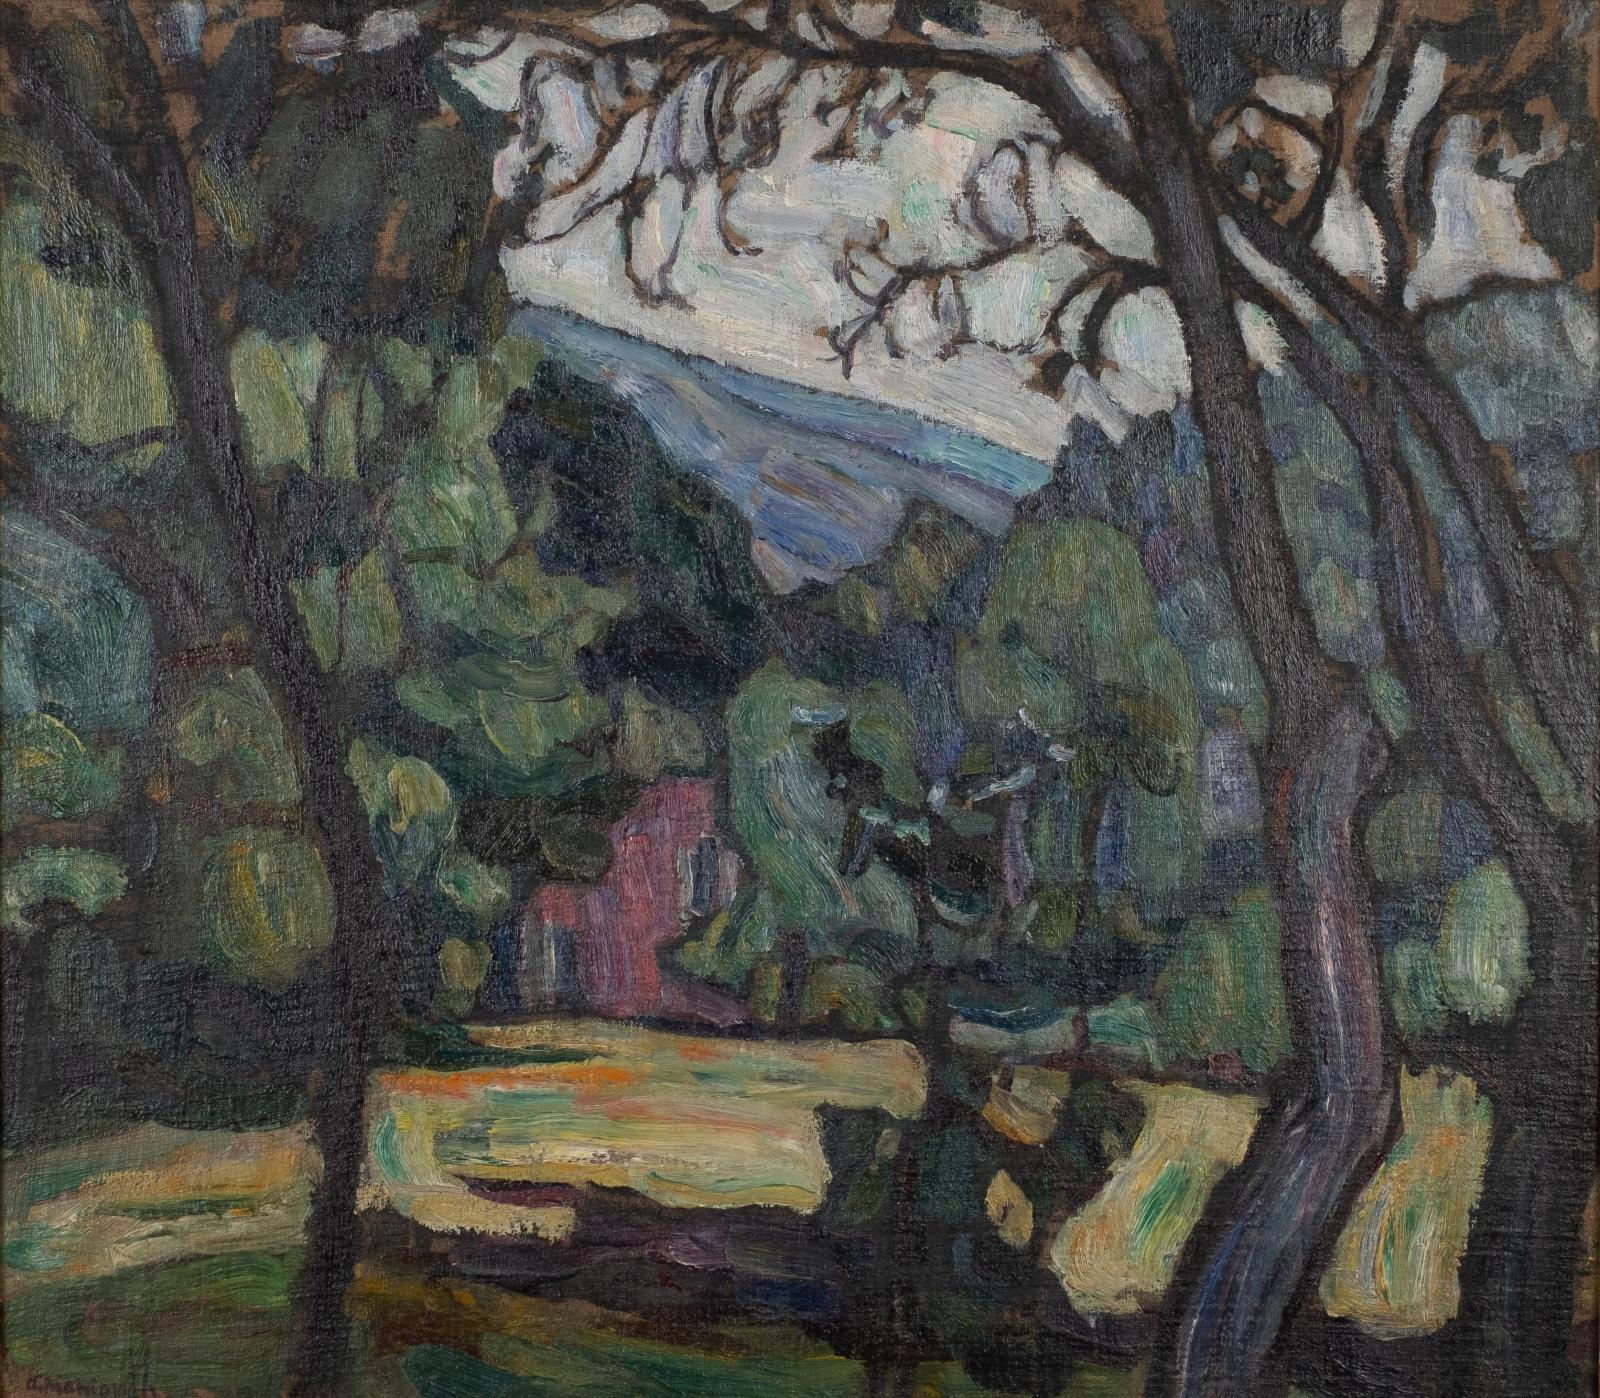 A dark landscape painting with trees and a red house